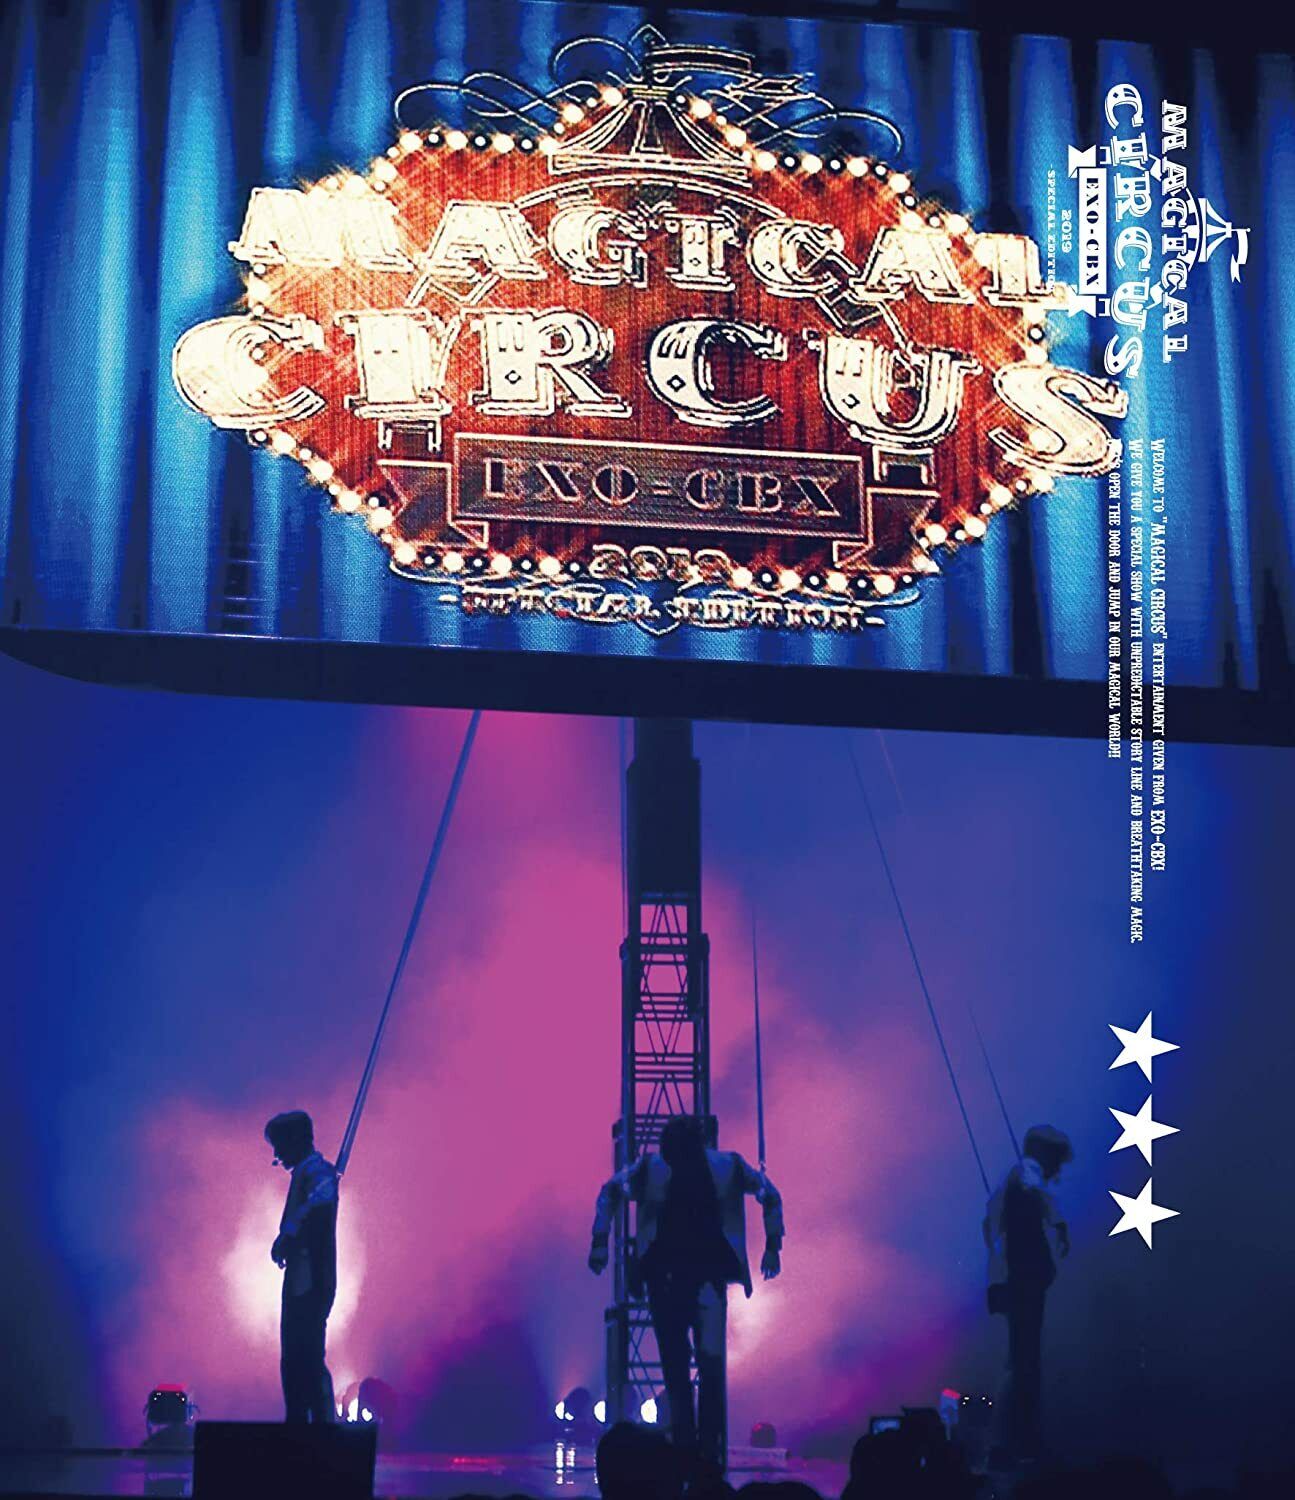 Exo-cbx Magical Circus 2019 Special Edition Blu-ray Japan for sale 